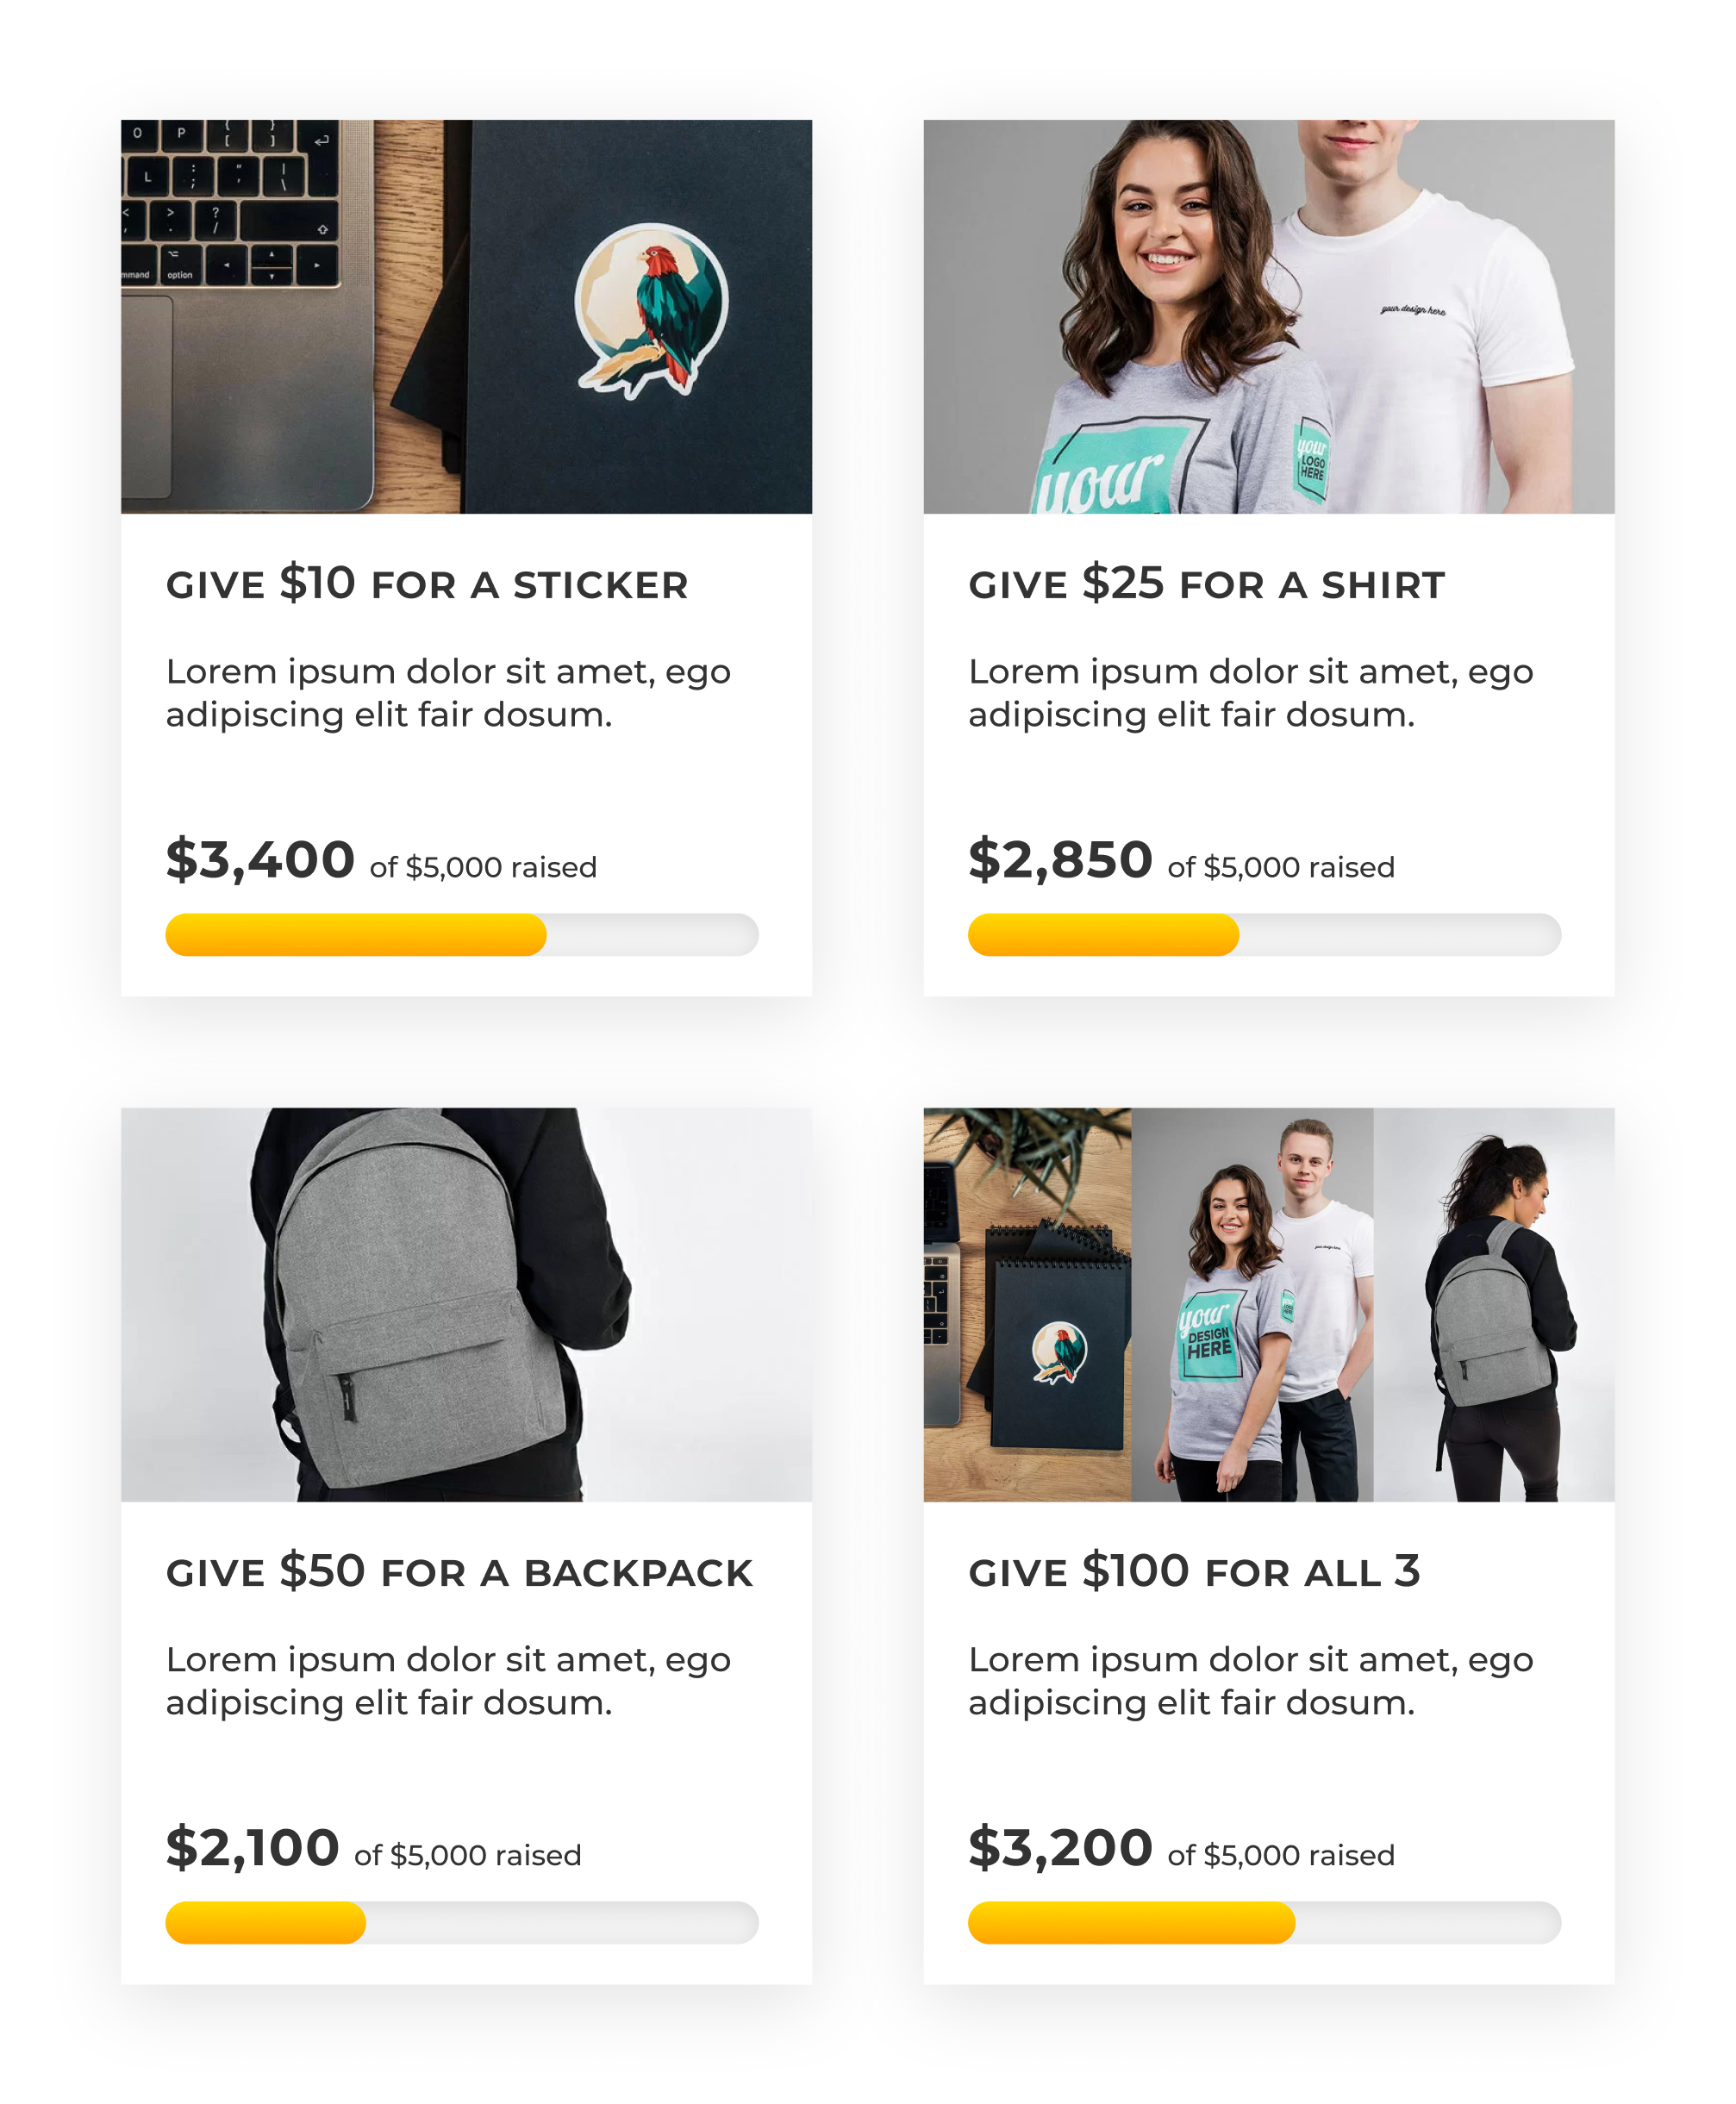 A donation form grid can be set with 4 different forms for various levels of giving that show donor gift options as: Give $10 for a sticker, $25 for a shirt, $50 for a backpack, or $100 for all three items.